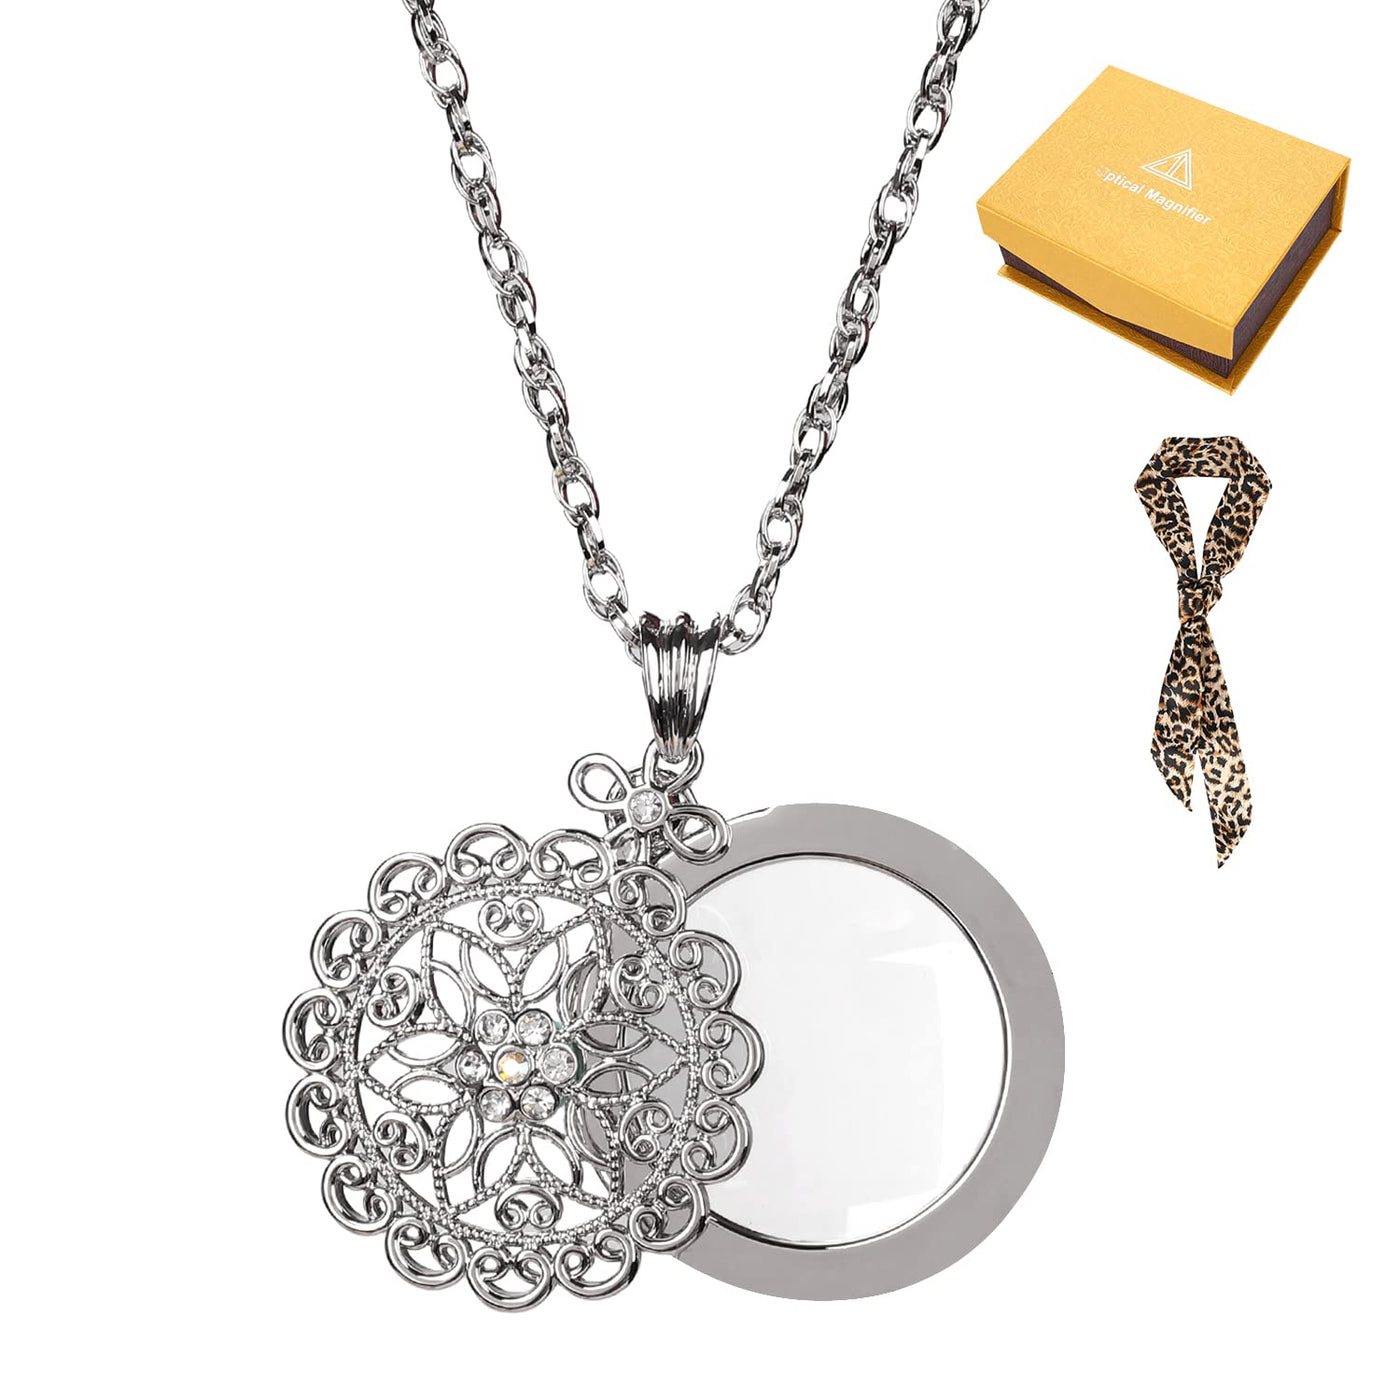 Exquisite Magnifier Necklace Magnifying Glass Jewelry Reading